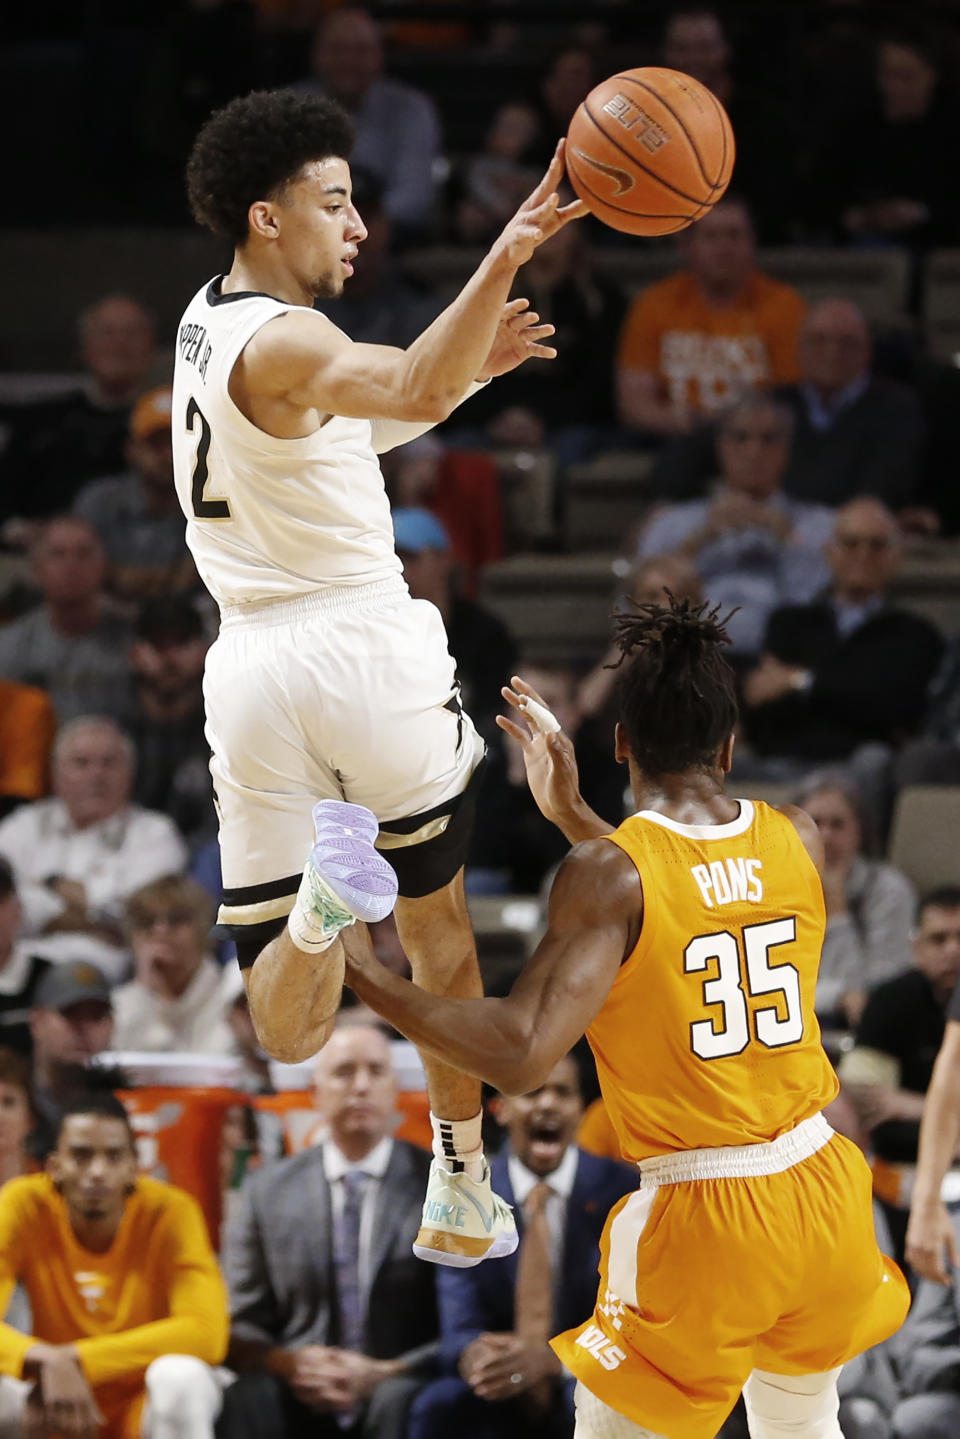 Vanderbilt guard Scotty Pippen Jr. (2) passes the ball over Tennessee guard Yves Pons (35) during the first half of an NCAA college basketball game Saturday, Jan. 18, 2020, in Nashville, Tenn. Tennessee won 66-45. (AP Photo/Mark Humphrey)